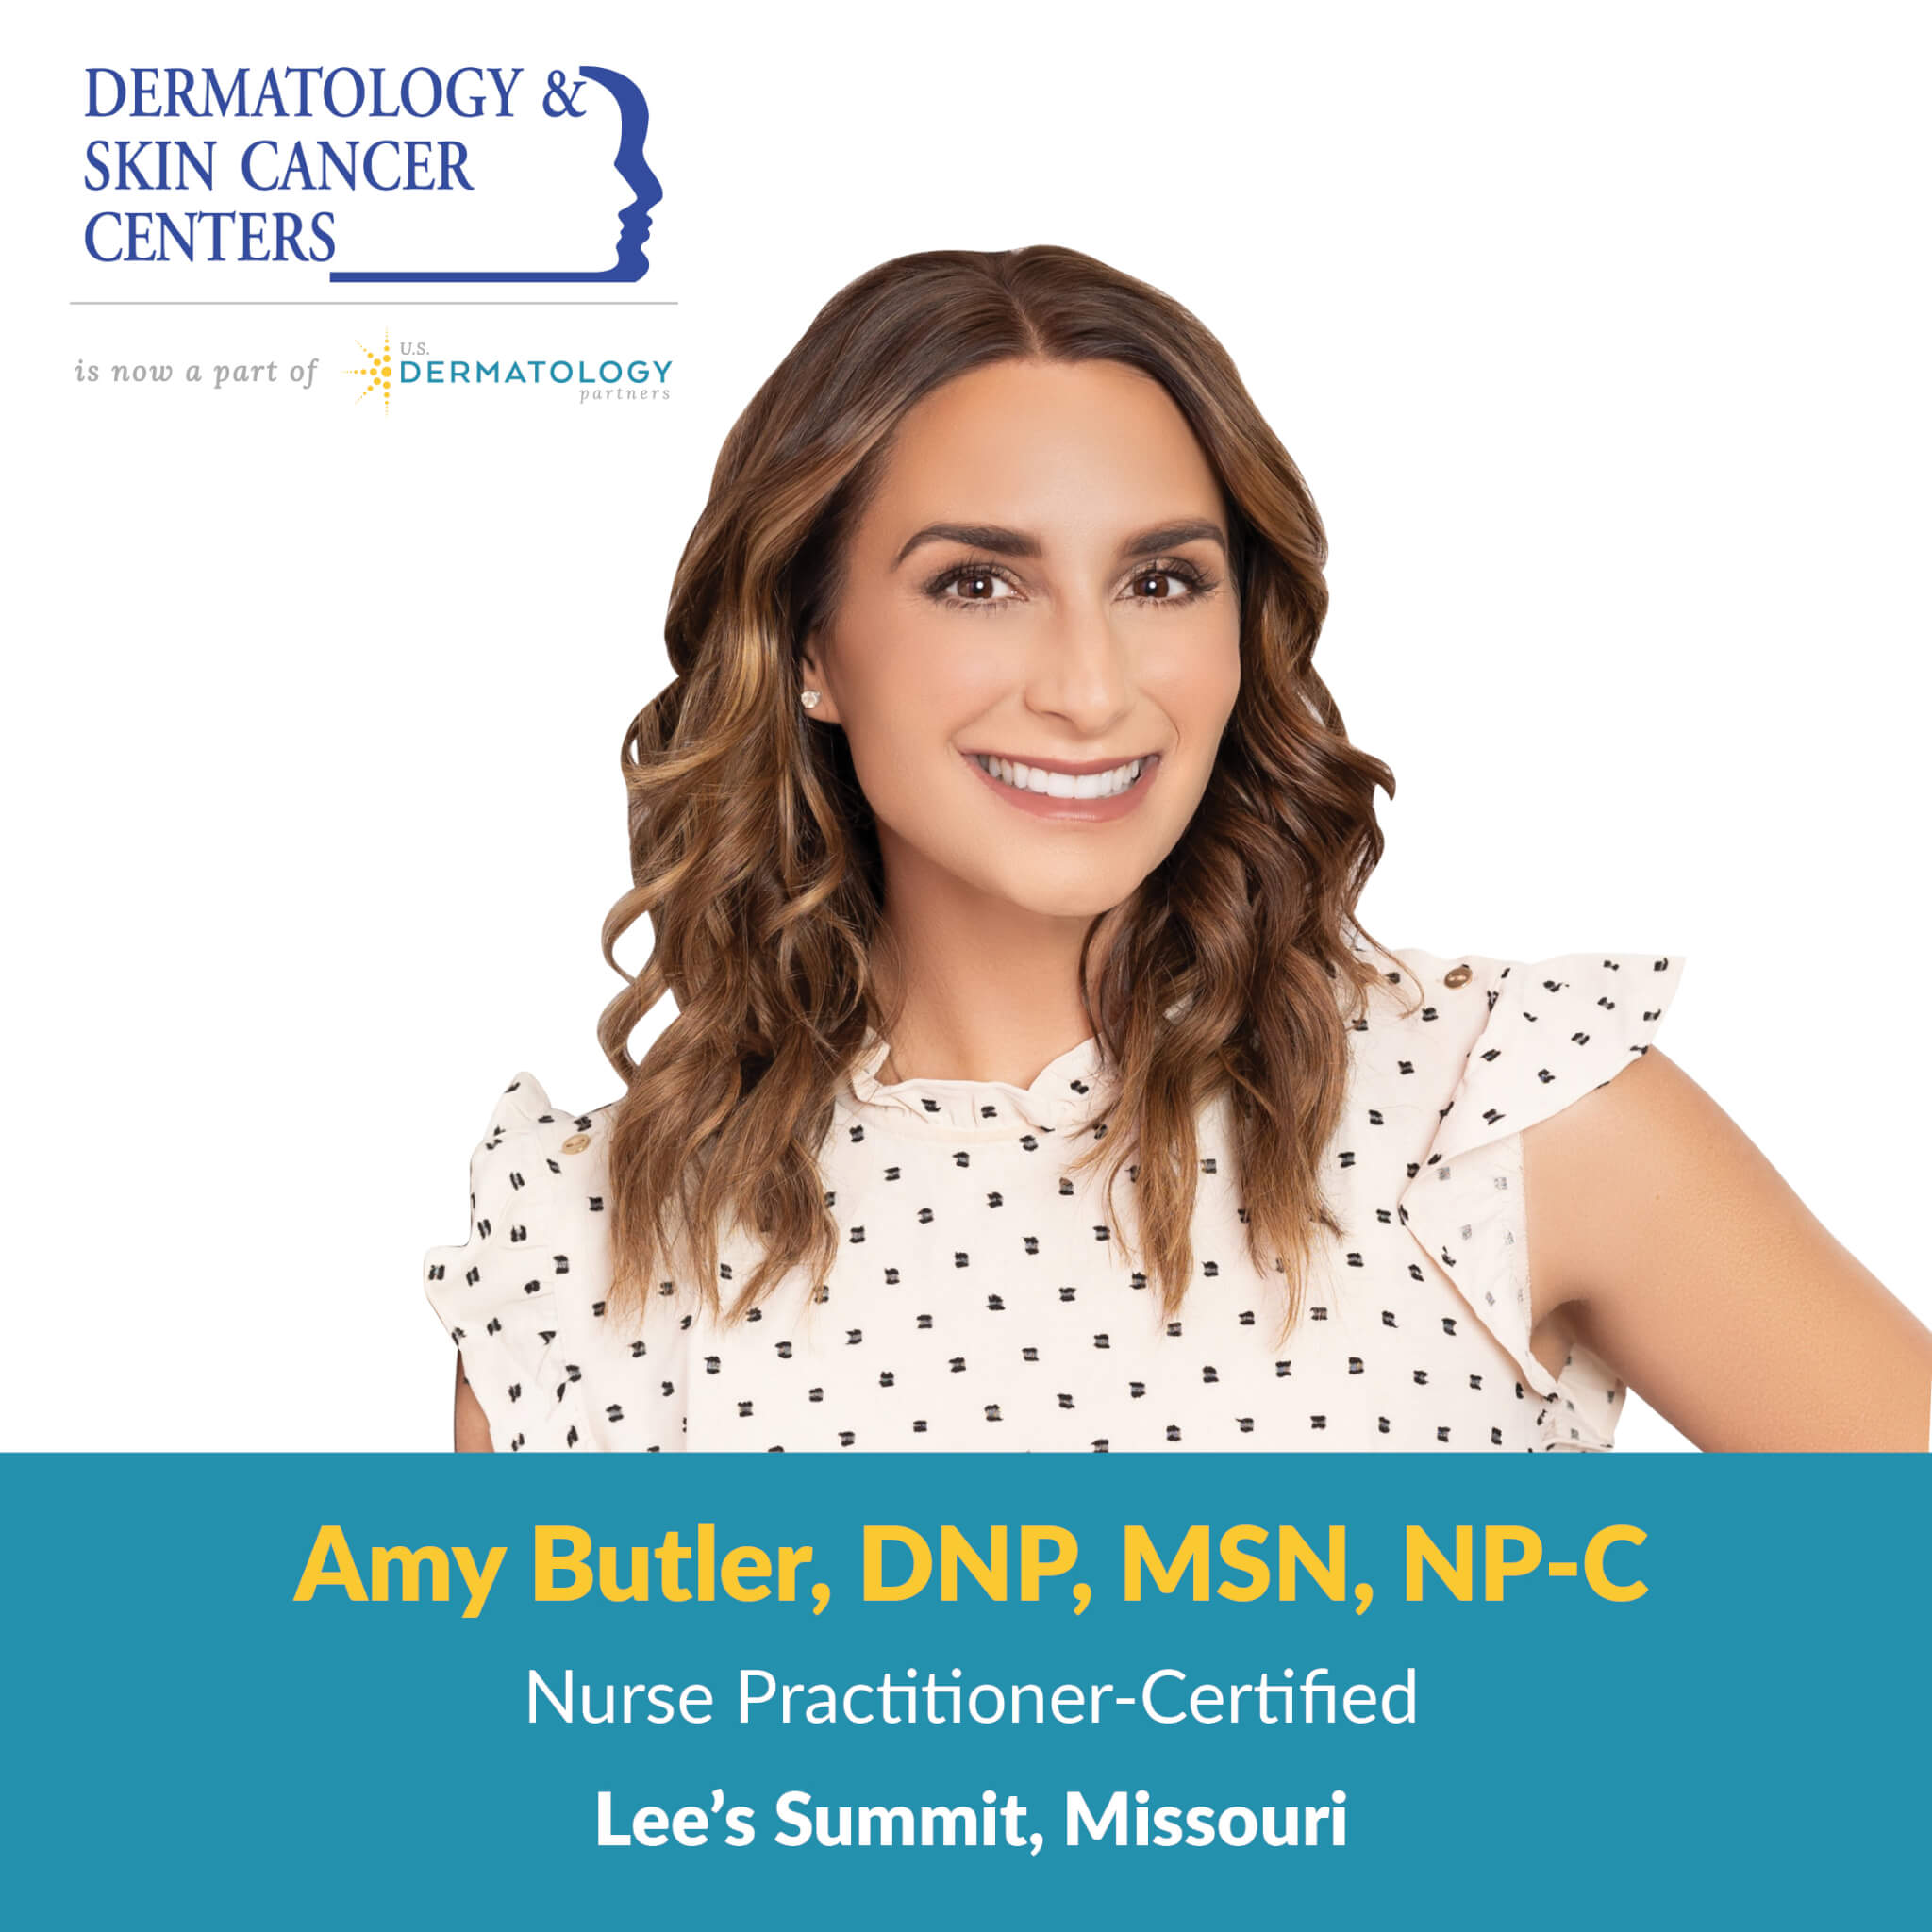 Amy Butler is a certified nurse practitioner at U.S. Dermatology Partners in Lee's Summit, Missouri. Now accepting new patients!